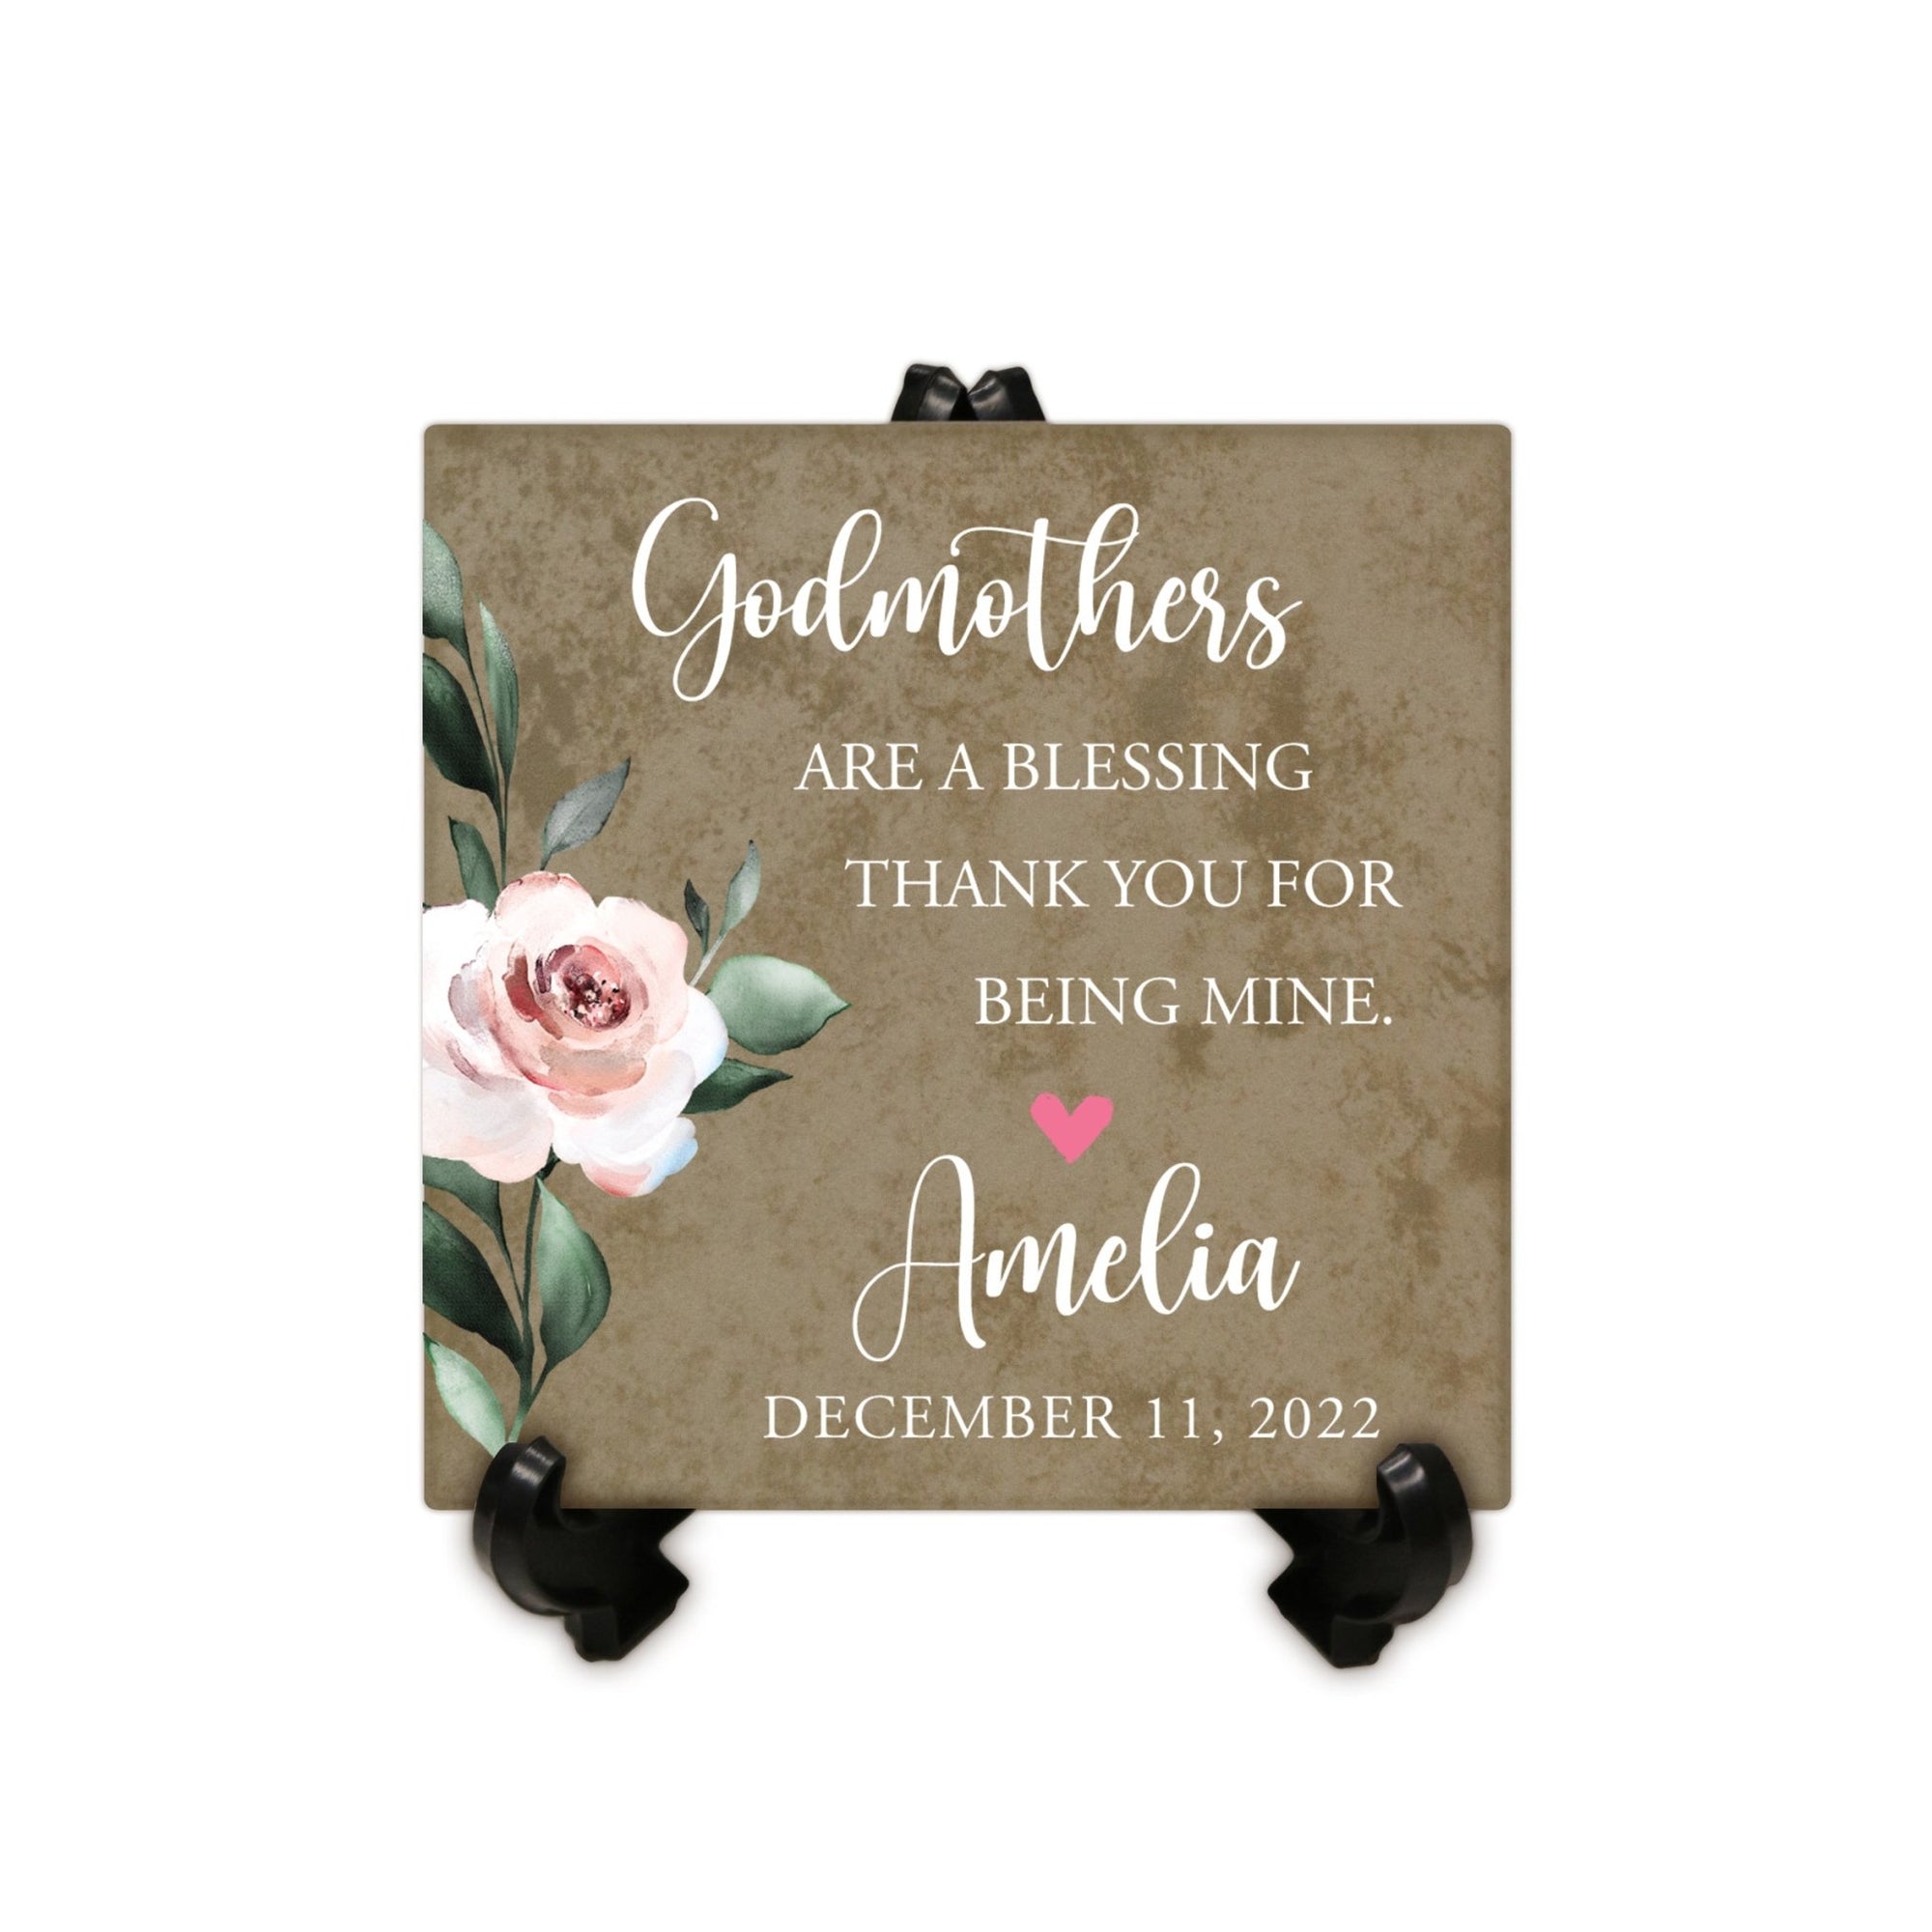 Personalized Memorial Ceramic Trivet with Stand for Home Decor - Godmothers - LifeSong Milestones